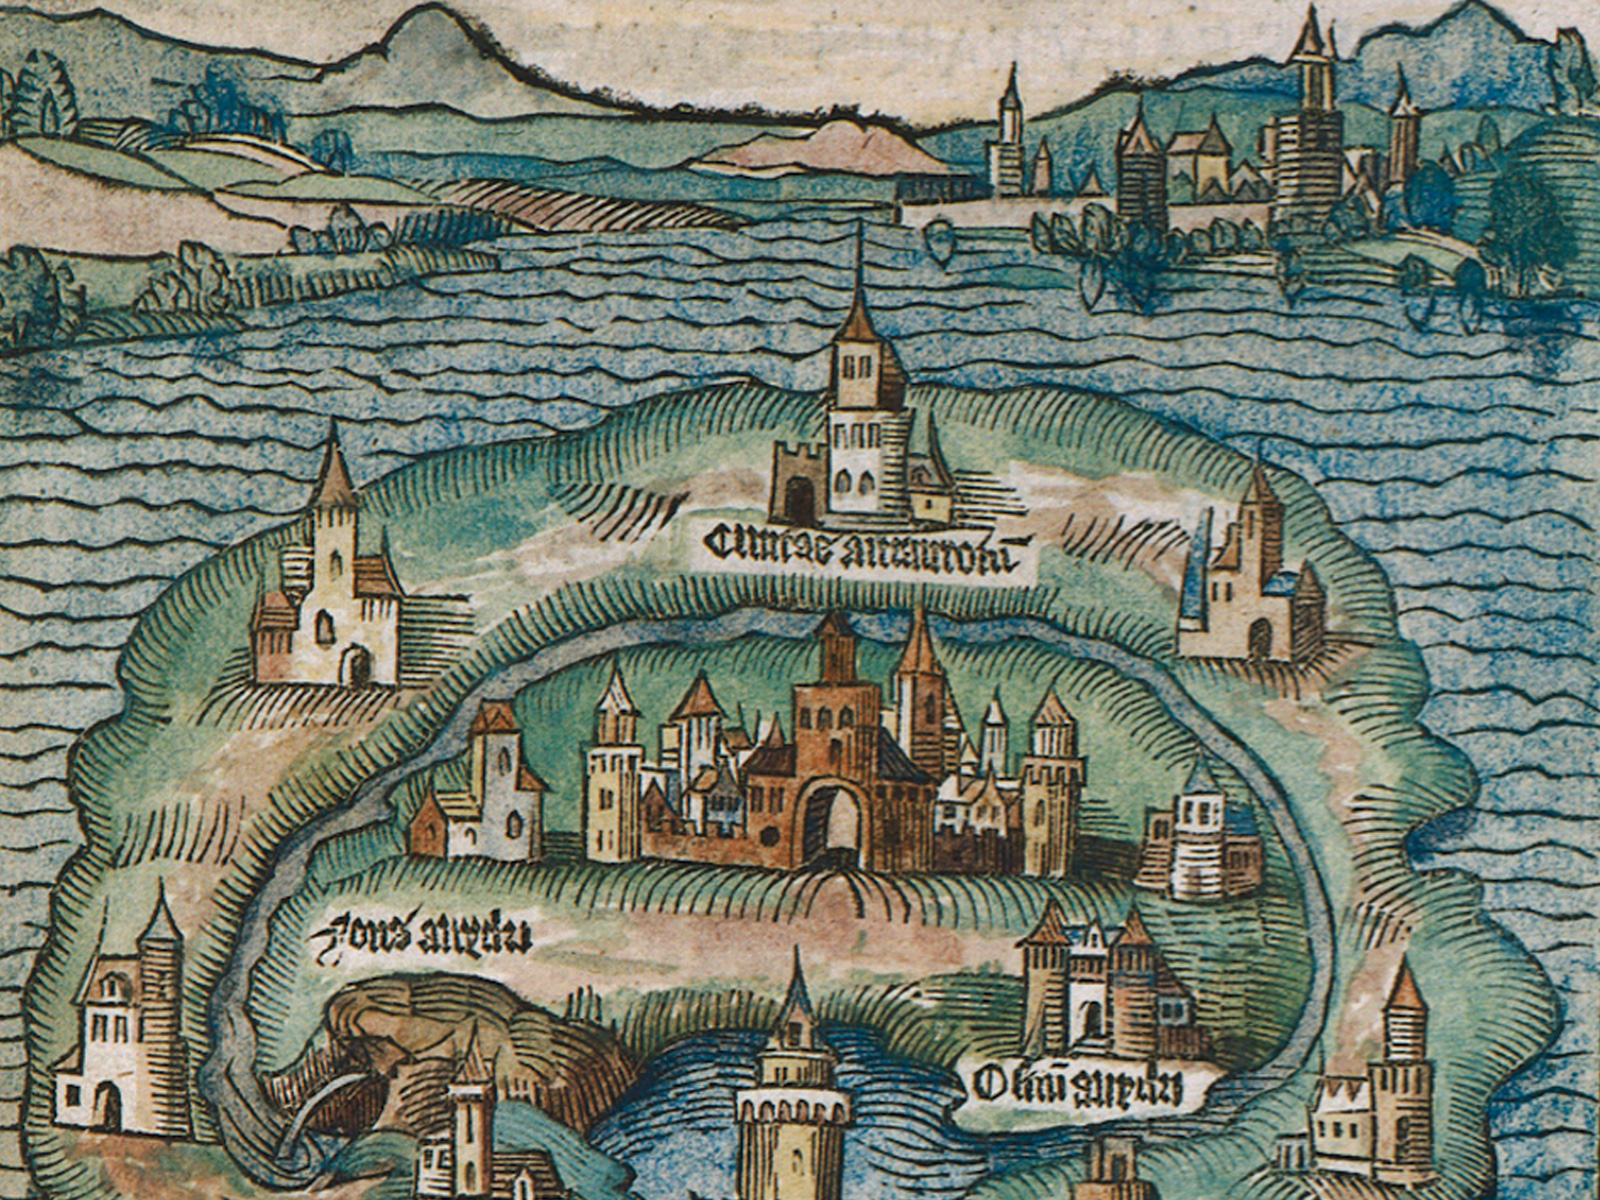 The search for utopia – Swiss National Museum - Swiss history blog